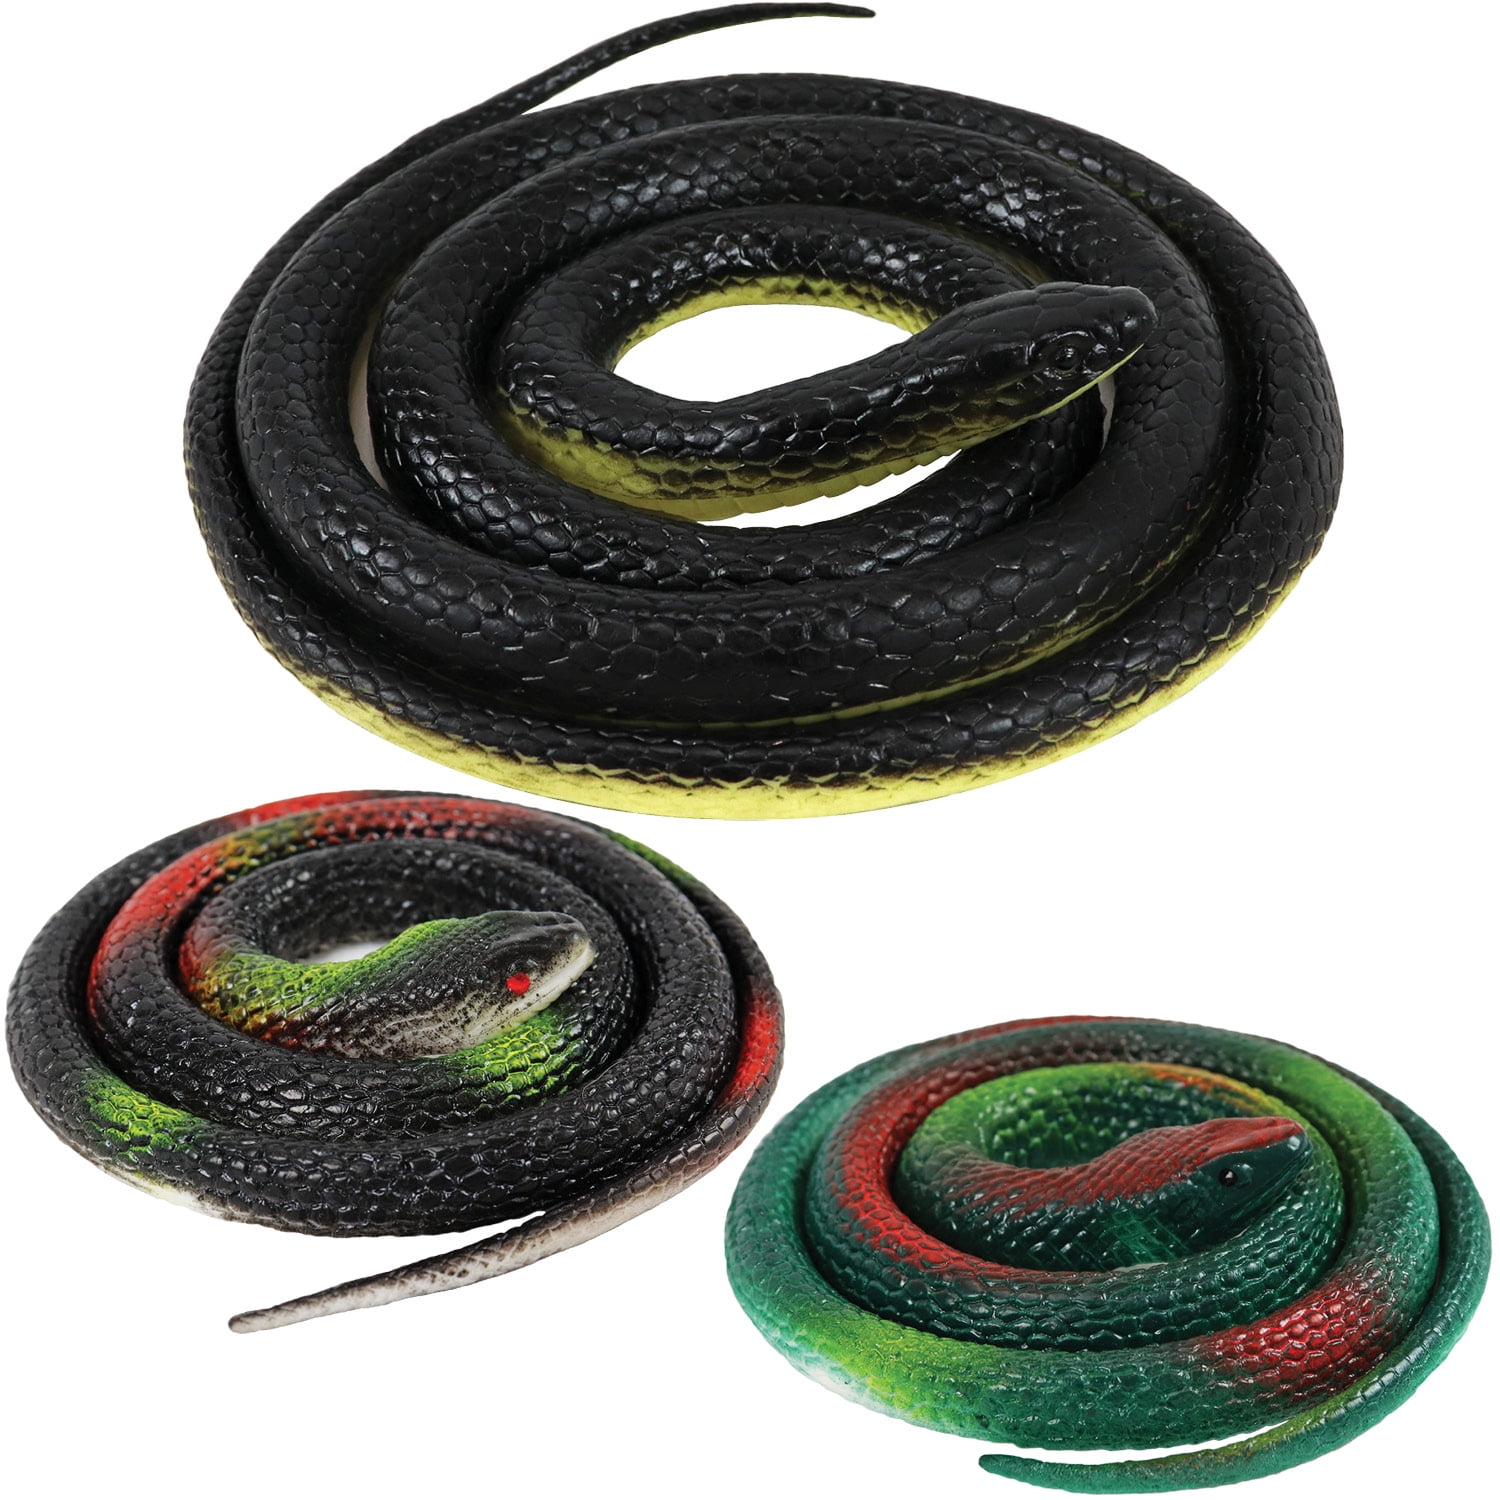 3 Pieces Realistic Rubber Fake Snakes 52 Inch and 29 Inch, Black Mamba ...